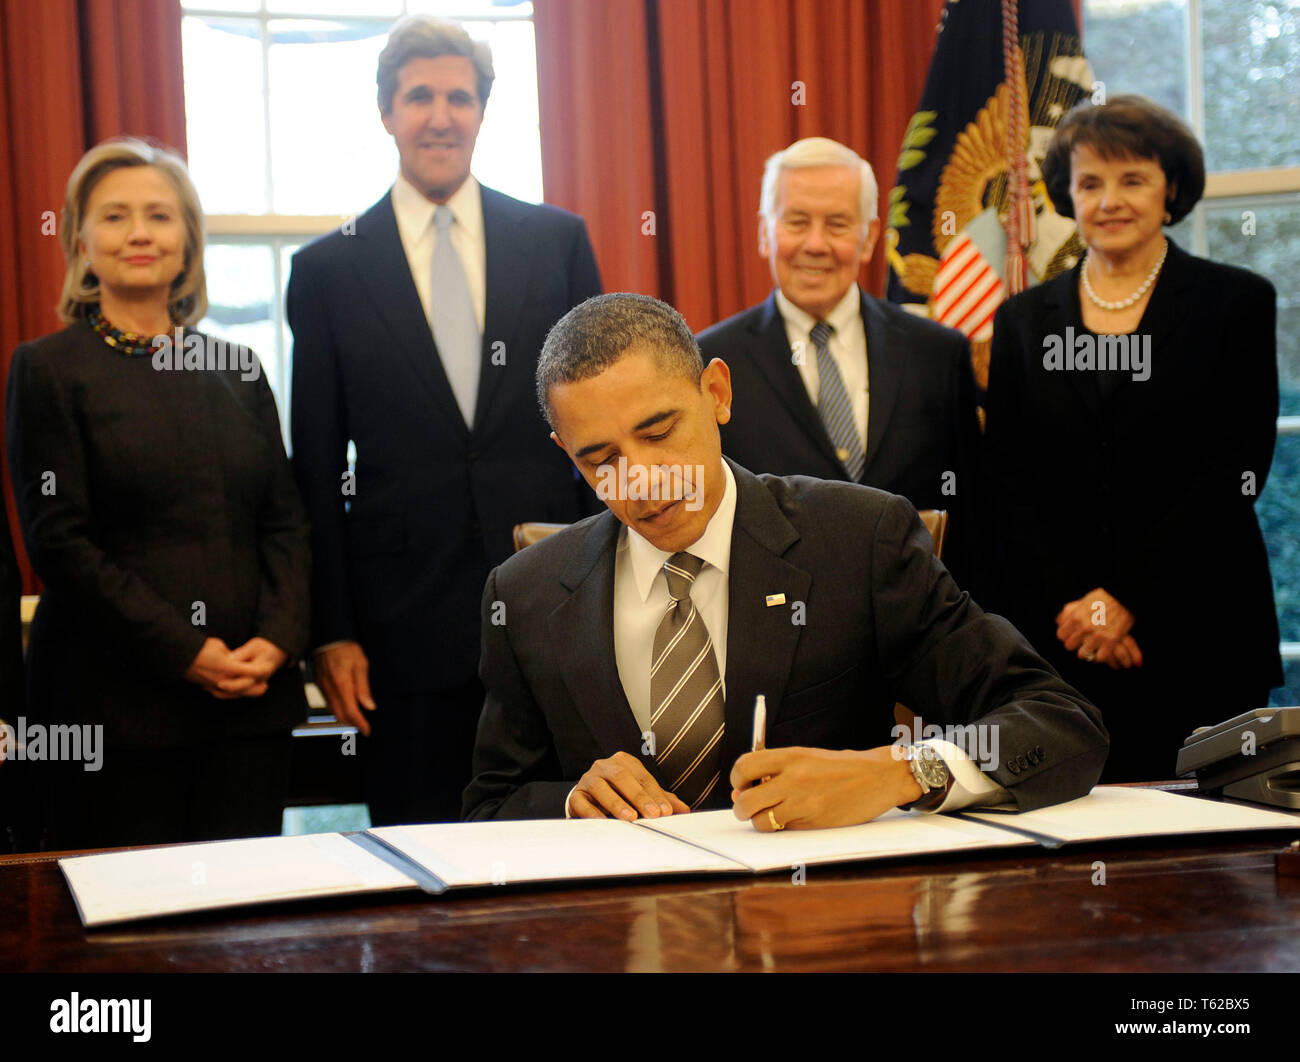 ***FILE PHOTO*** Former Senator Richard Lugar Has Passed Away. United States President Barack Obama signs the New START Treaty during a ceremony in the Oval Office of the White House, with, from left, U.S. Secretary of State Hillary Rodham Clinton, U.S. Senator John Kerry (Democrat of Massachusetts), U.S. Senator Richard Lugar (Republican of Indiana), U.S. Senator Dianne Feinstein (Democrat of California). Credit: Leslie E. Kossoff/Pool via CNP /MediaPunch Stock Photo